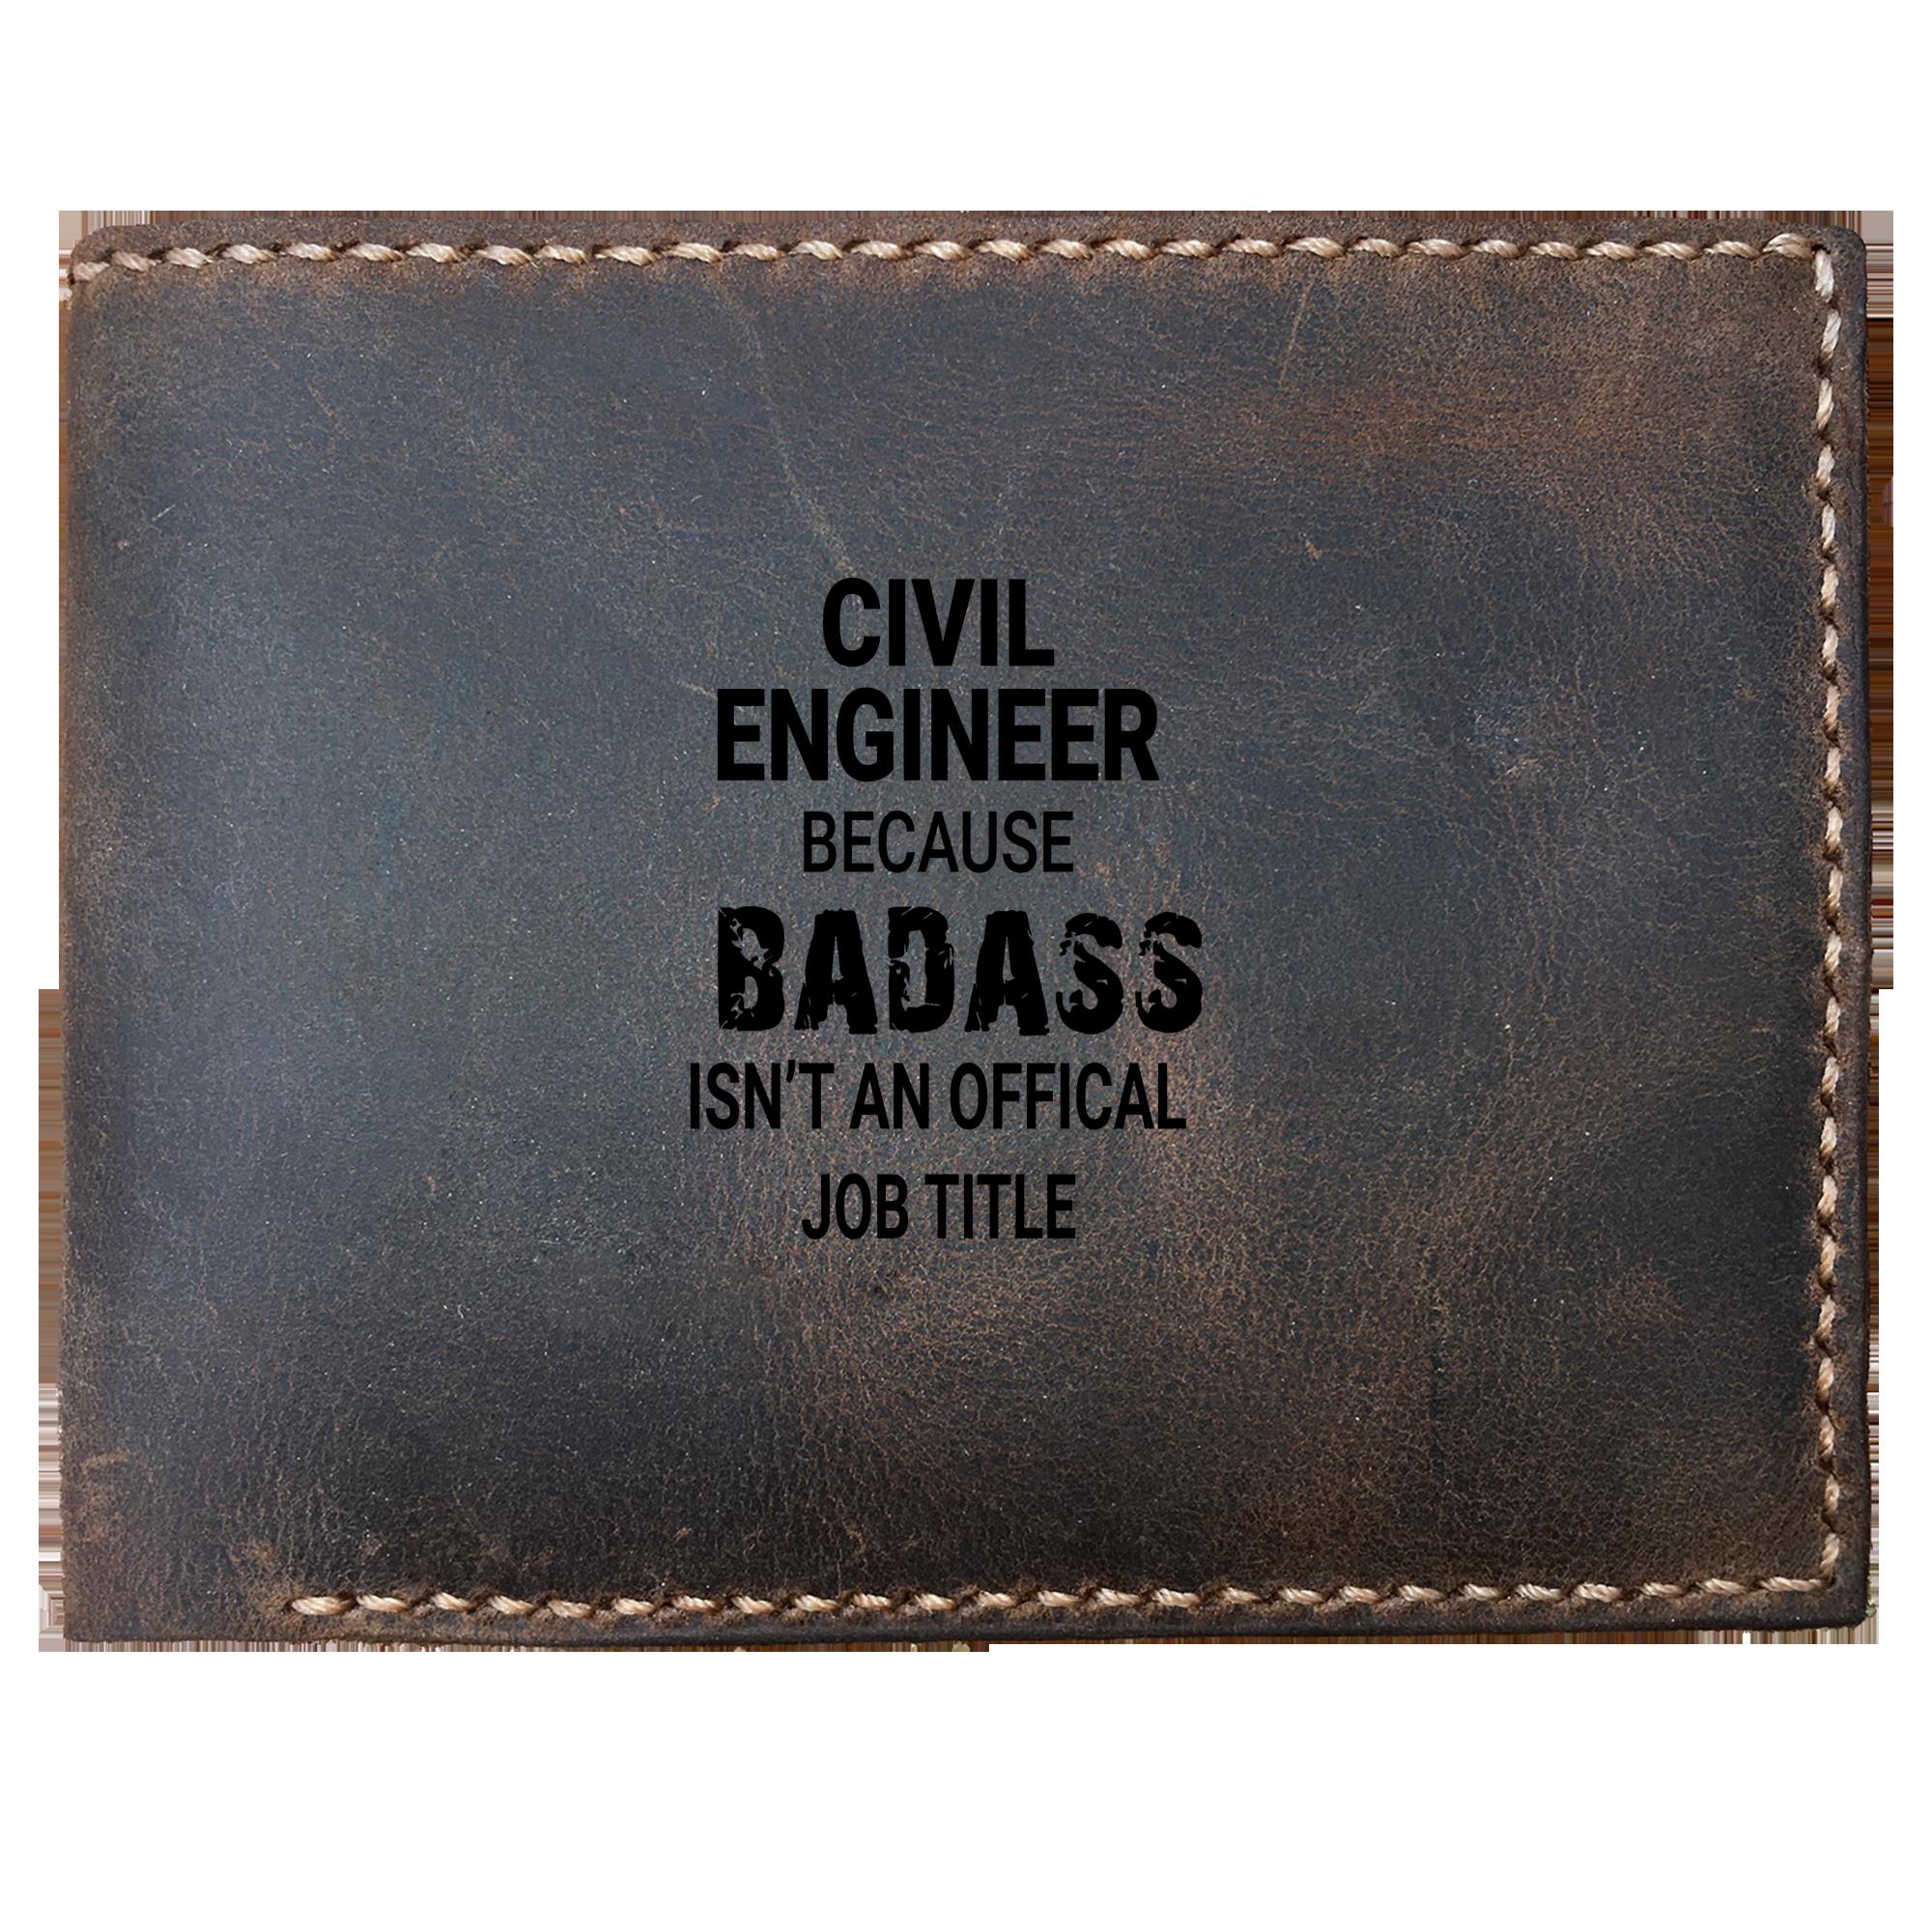 Skitongifts Funny Custom Laser Engraved Bifold Leather Wallet For Men, Civil Engineering, Civil Engineer, Funny Graduation For Engineers